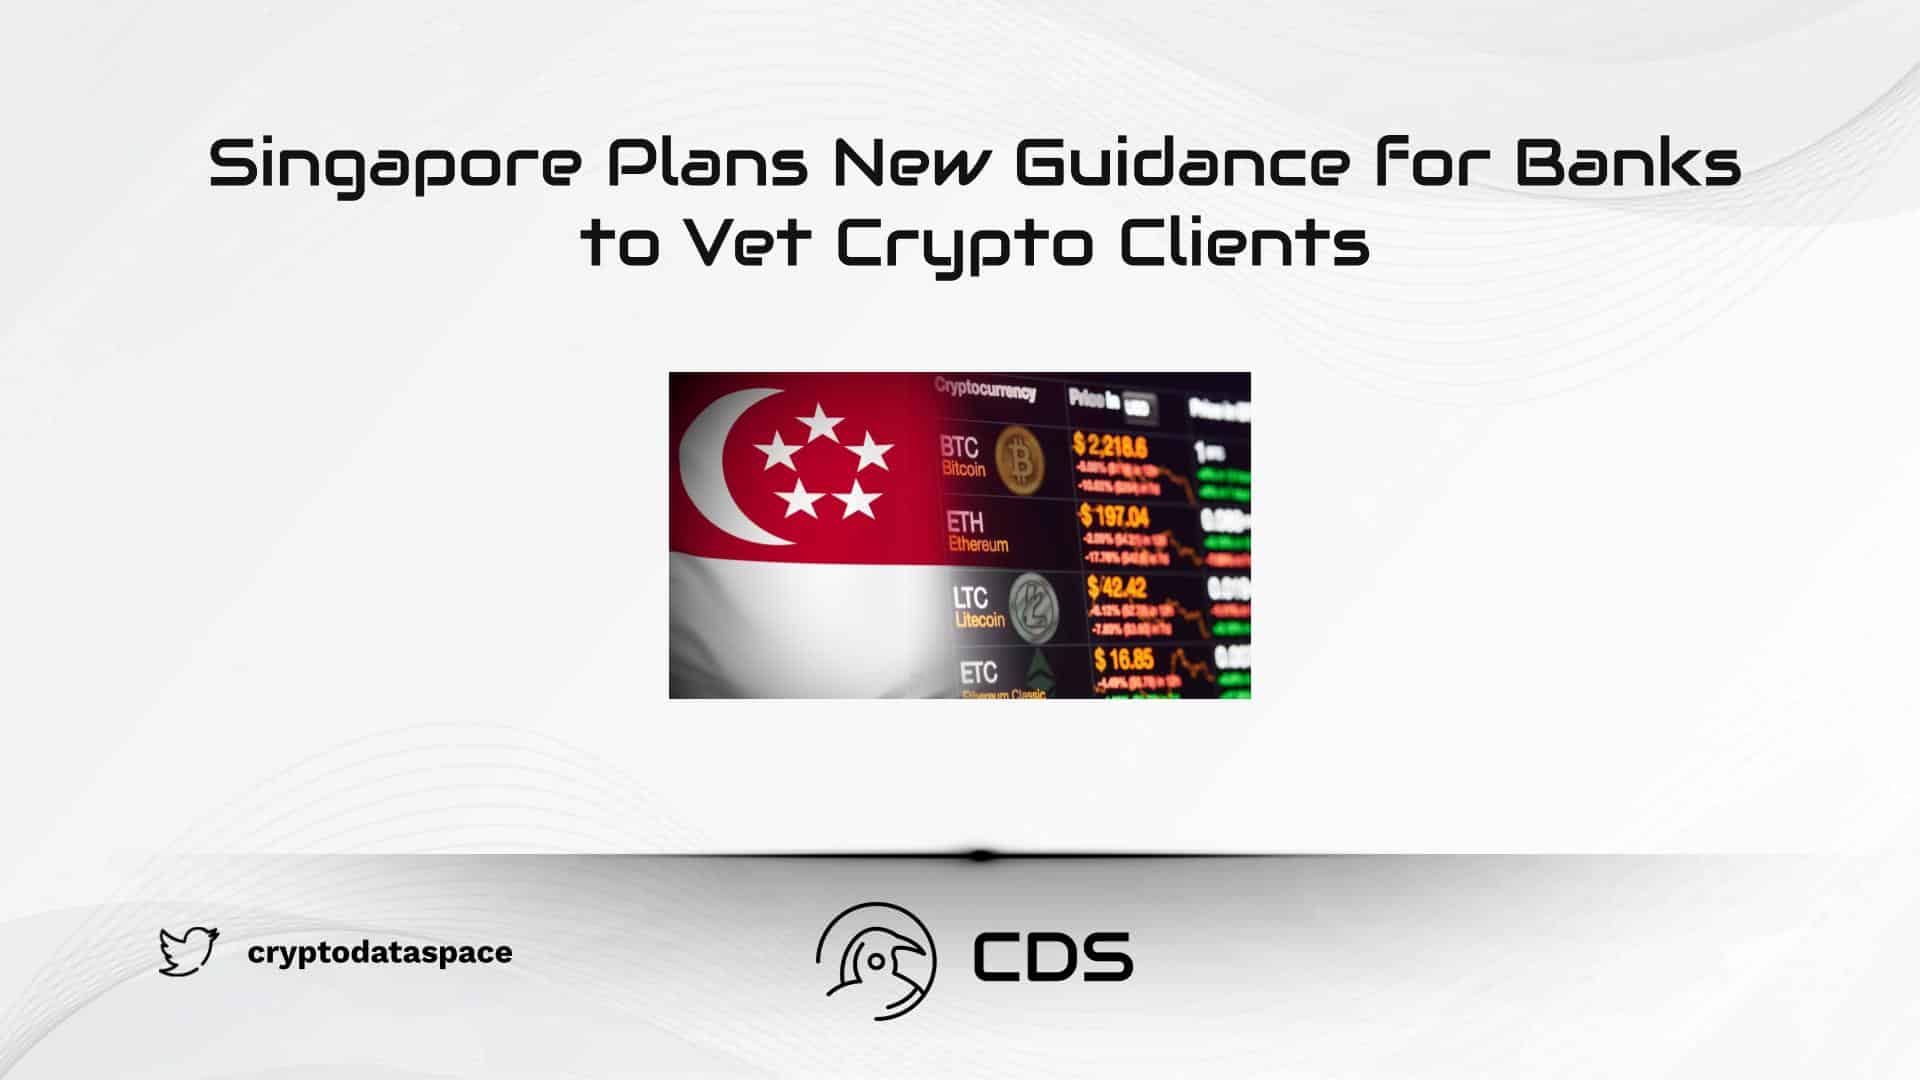 Singapore Plans New Guidance for Banks to Vet Crypto Clients